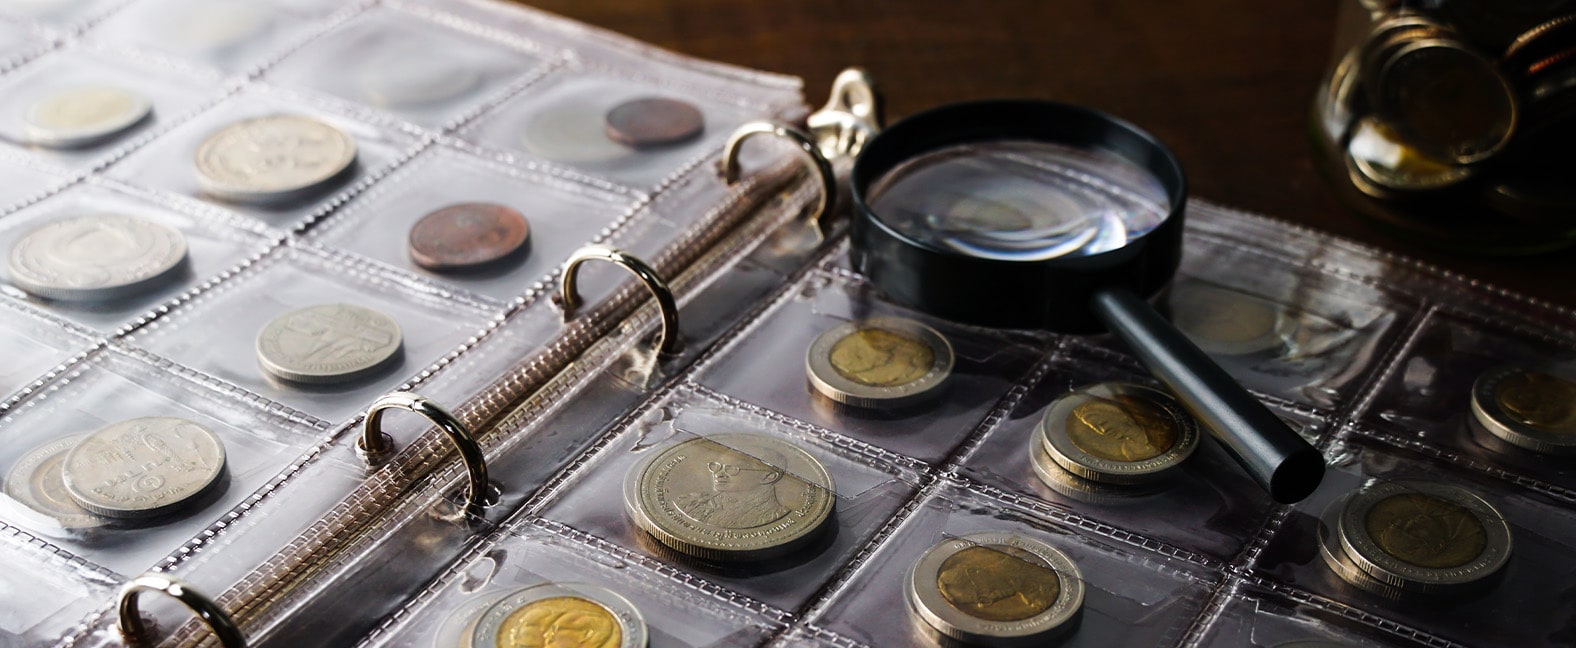 A magnifying glass sitting on a album of collector coins.